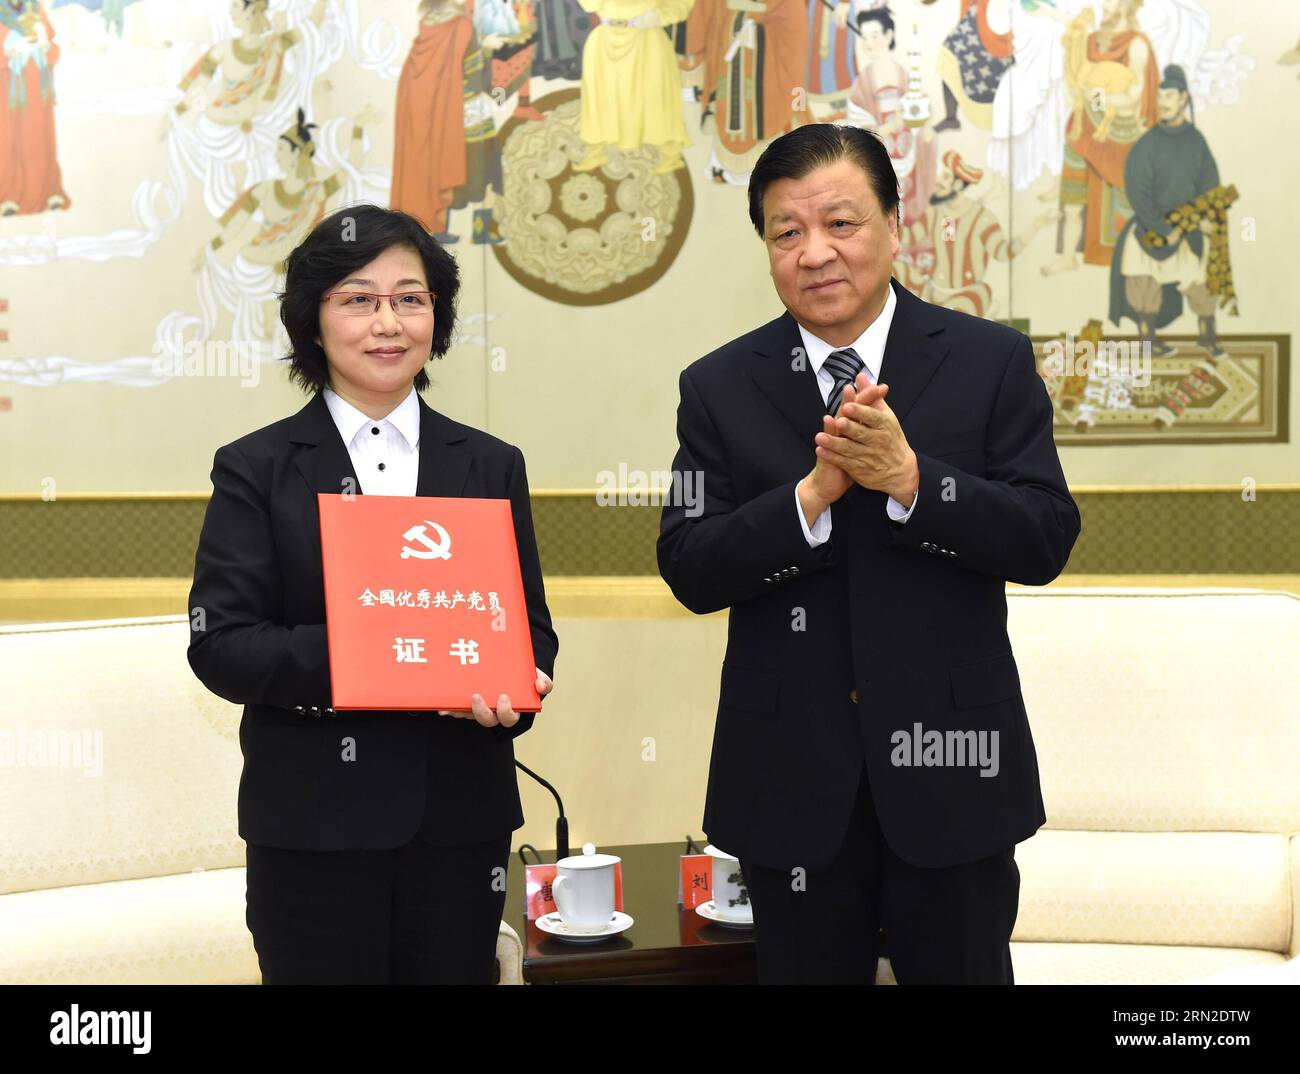 (150302) -- BEIJING, March 2, 2015 -- Liu Yunshan (R), a member of the Standing Committee of the Political Bureau of the Communist Party of China (CPC) Central Committee, confers an honorary credential for Zou Bihua, a late judge, to one of Zou s relatives, at the Great Hall of the People in Beijing, capital of China, March 2, 2015. Zou Bihua, former deputy head of Shanghai Higher People s Court, suffered a heart attack in December and died at the age of 47 after devoting himself to a judicial career for 26 years. ) (zkr) CHINA-BEIJING-LIU YUNSHAN-MEETING(CN) RaoxAimin PUBLICATIONxNOTxINxCHN Stock Photo